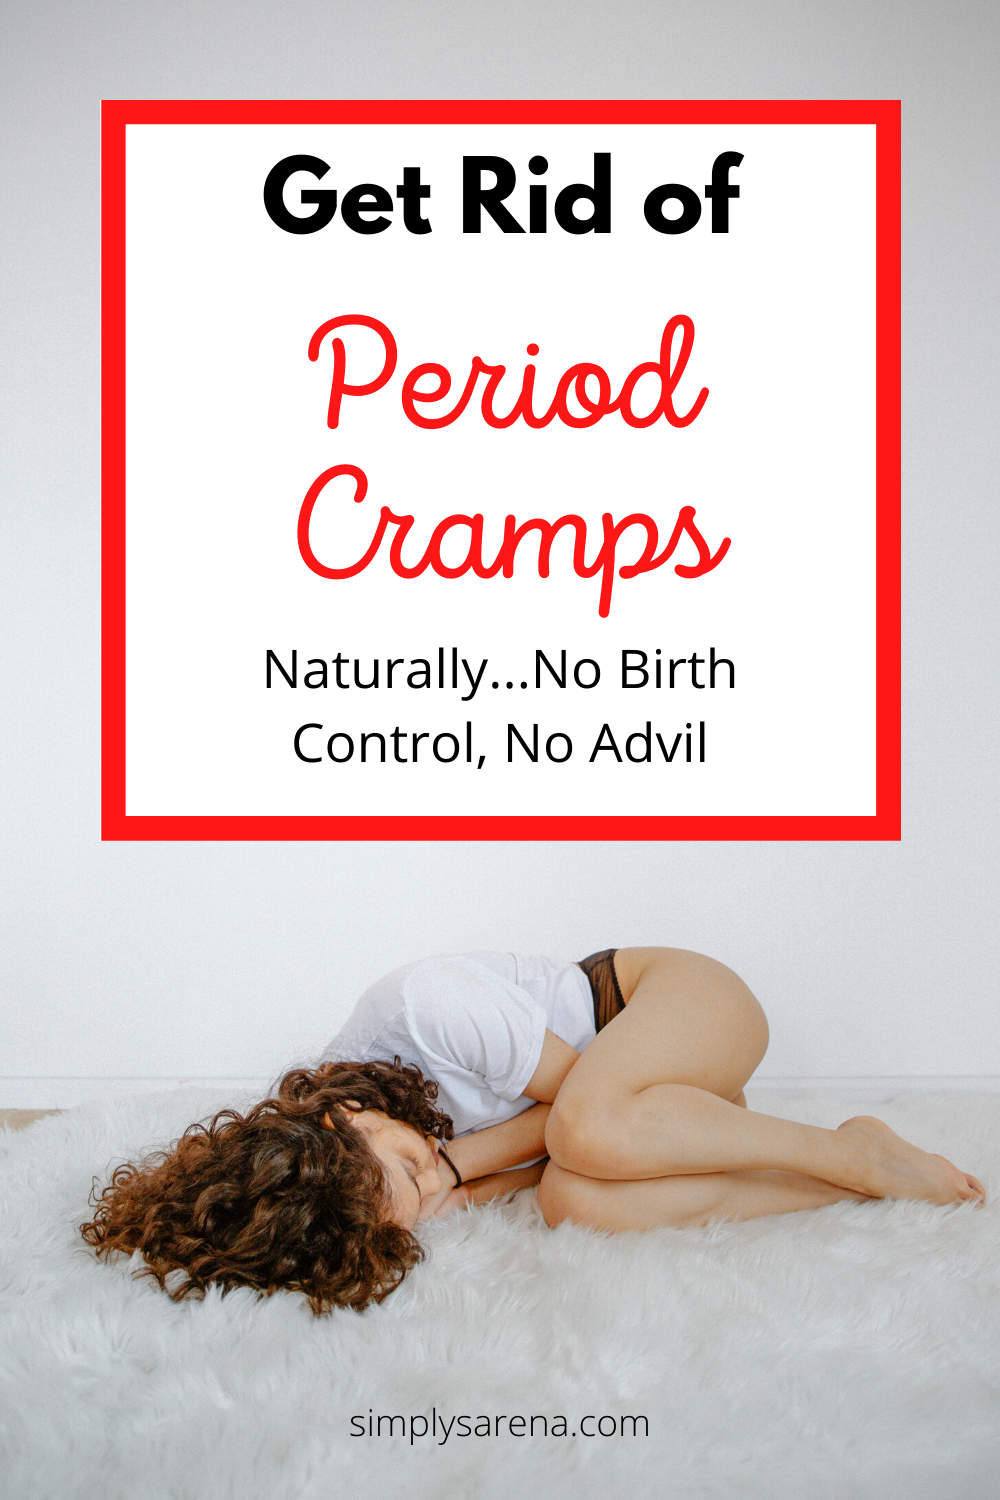 How to Get Rid of Period Cramps Naturally